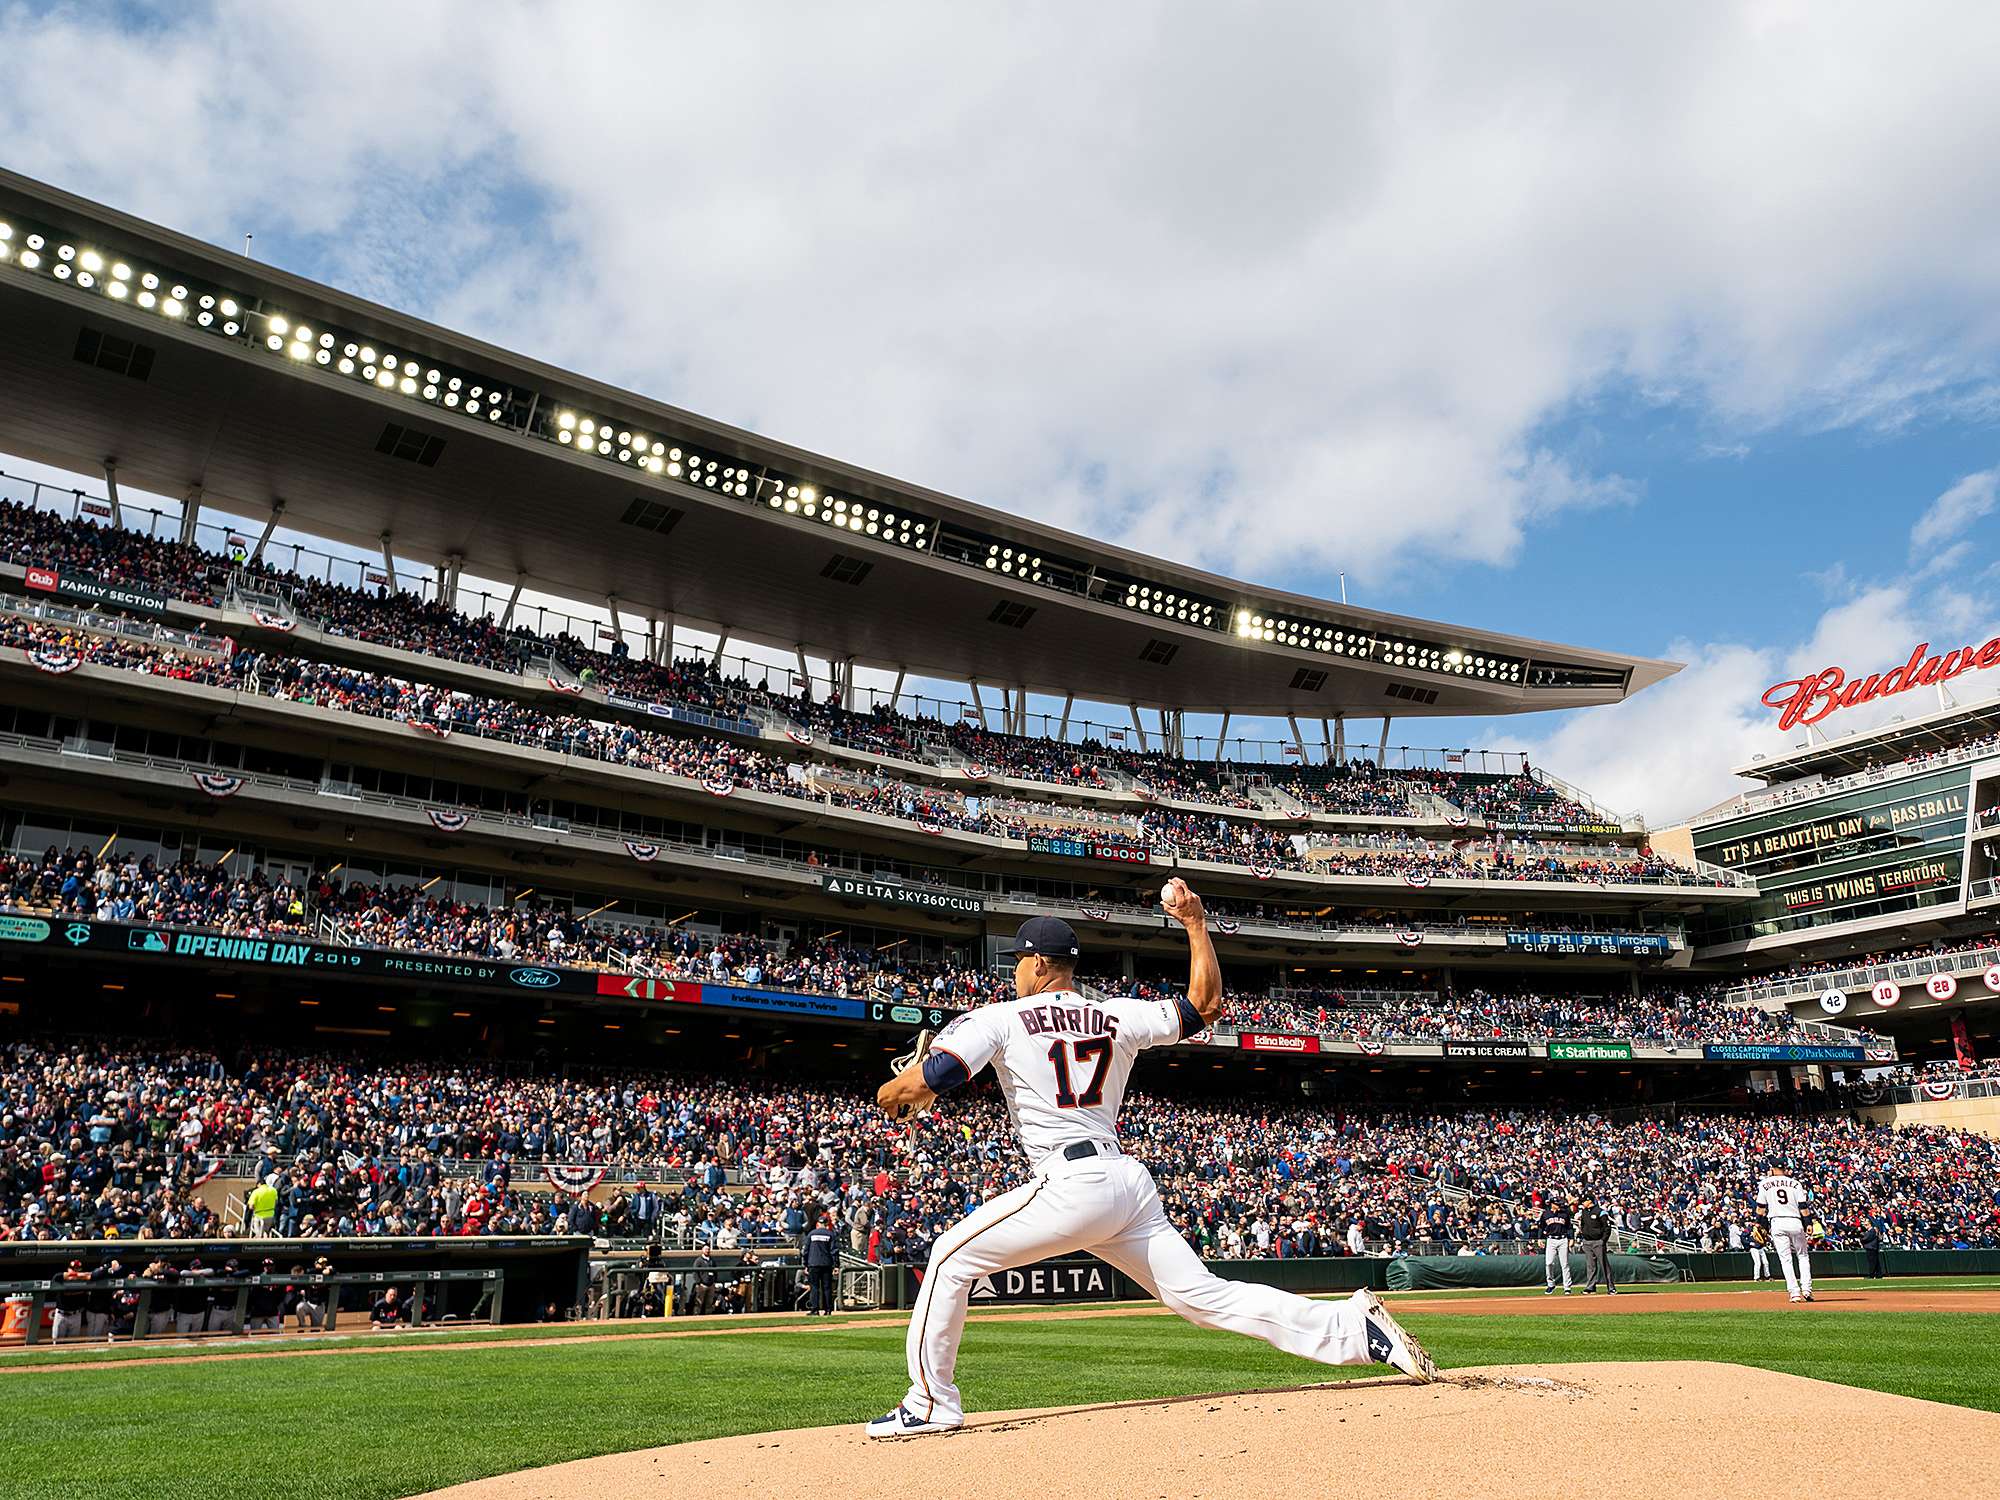 Twins are MLB's biggest surprise, led by Berrios and Perez